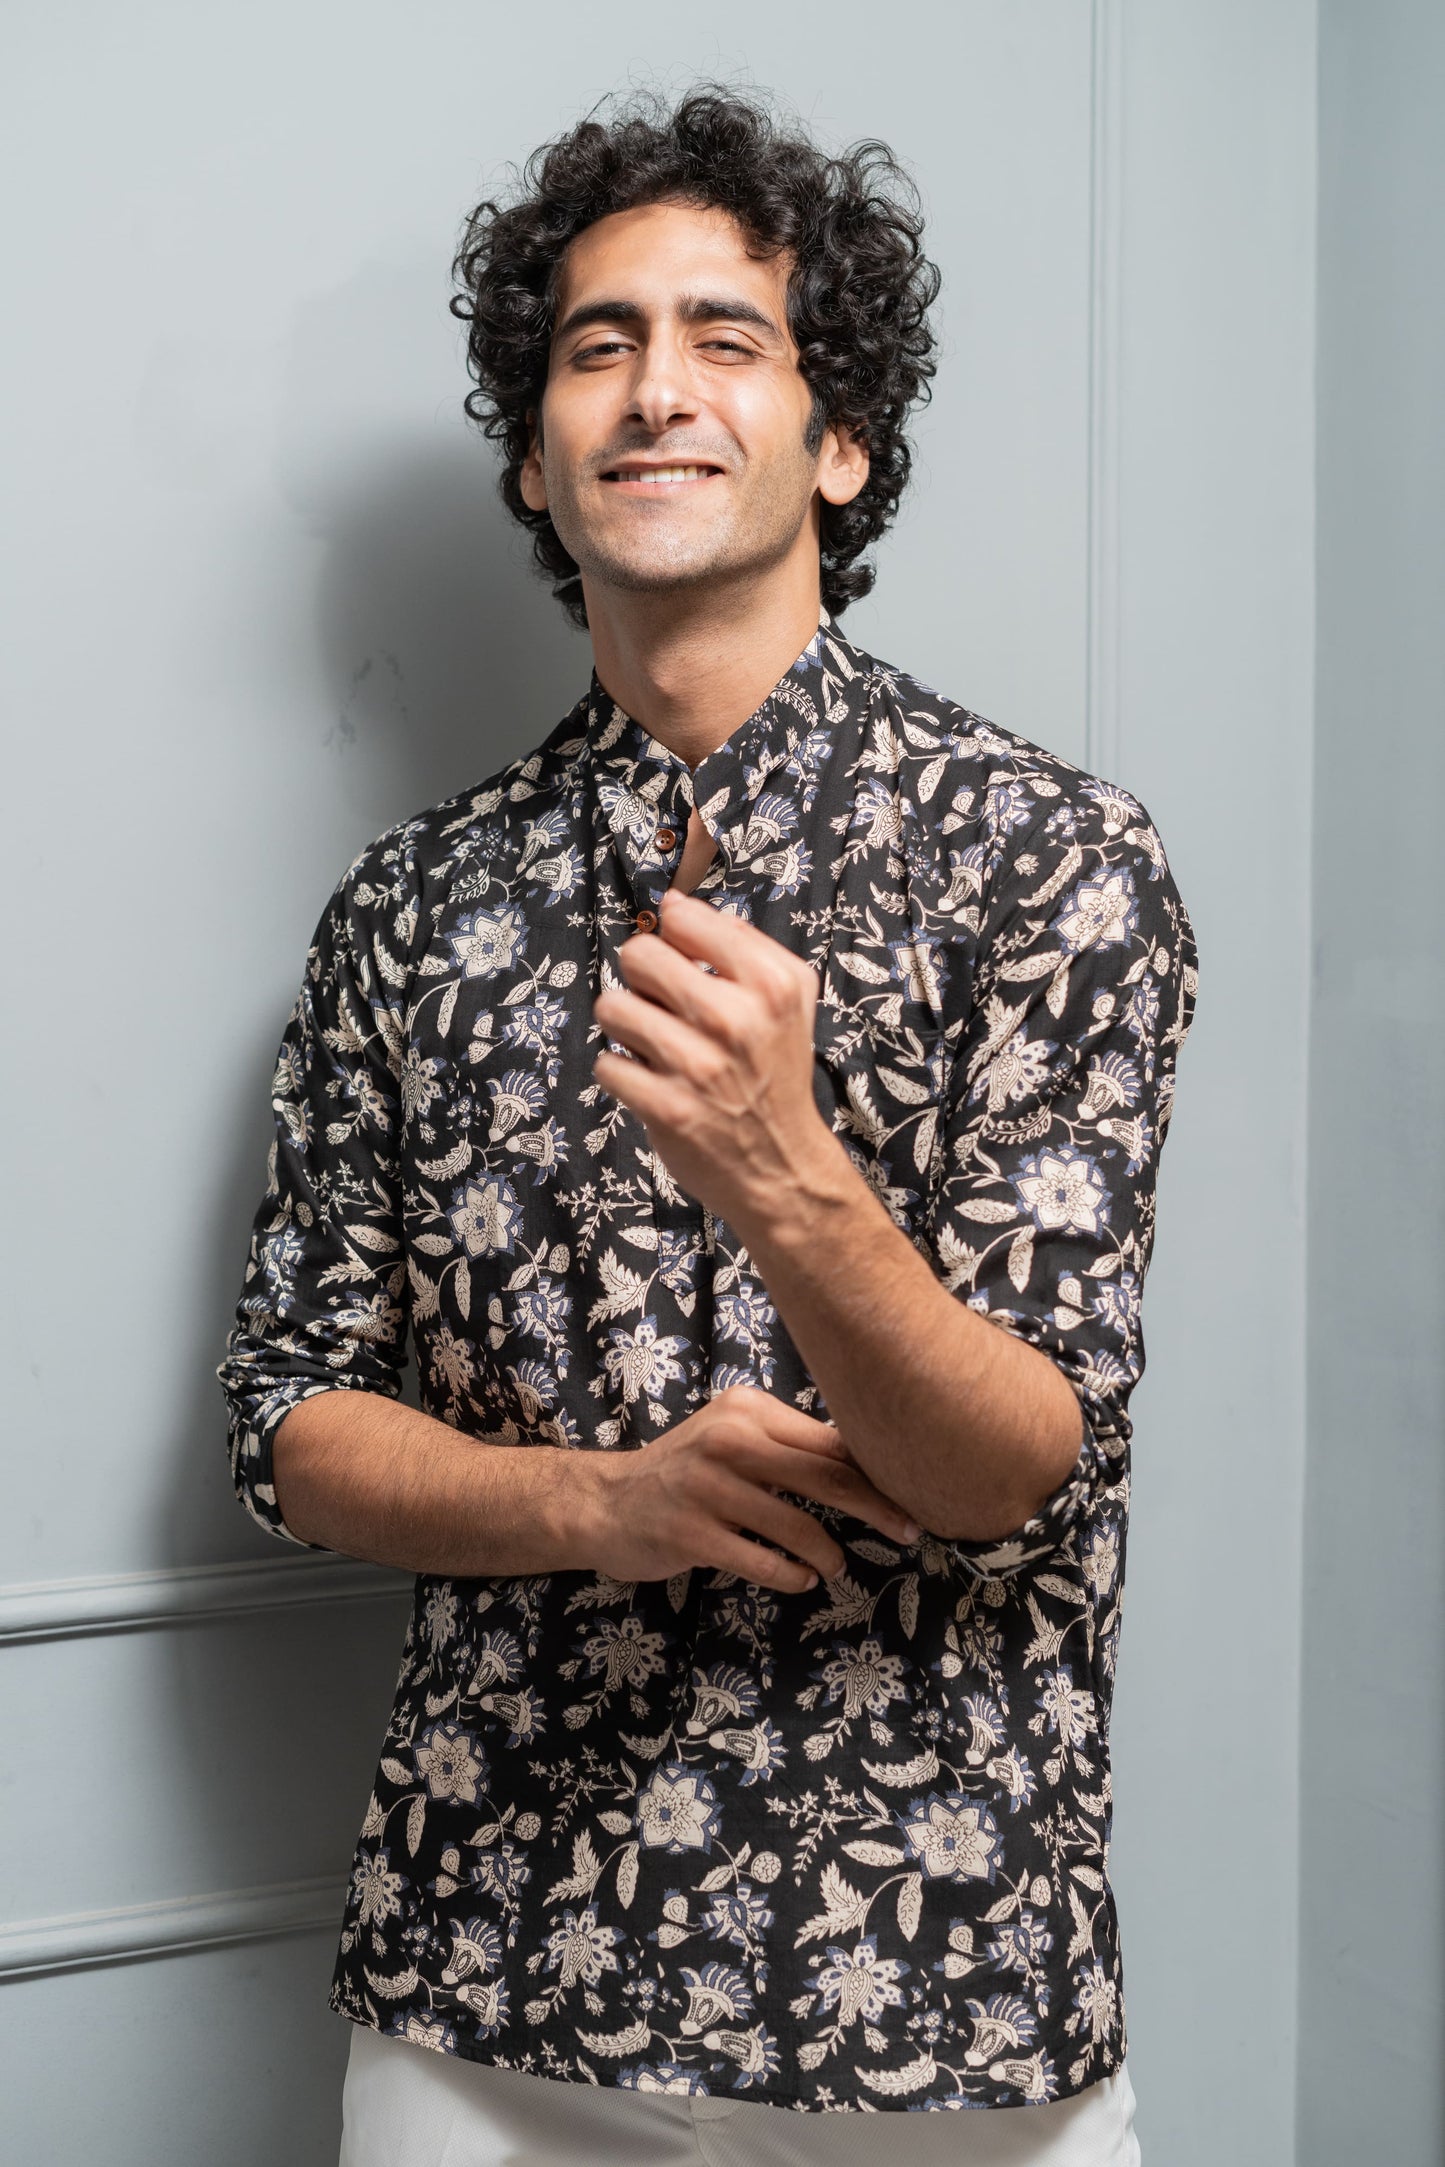 The Black And Off-White Short Kurta With All-Over Floral Print